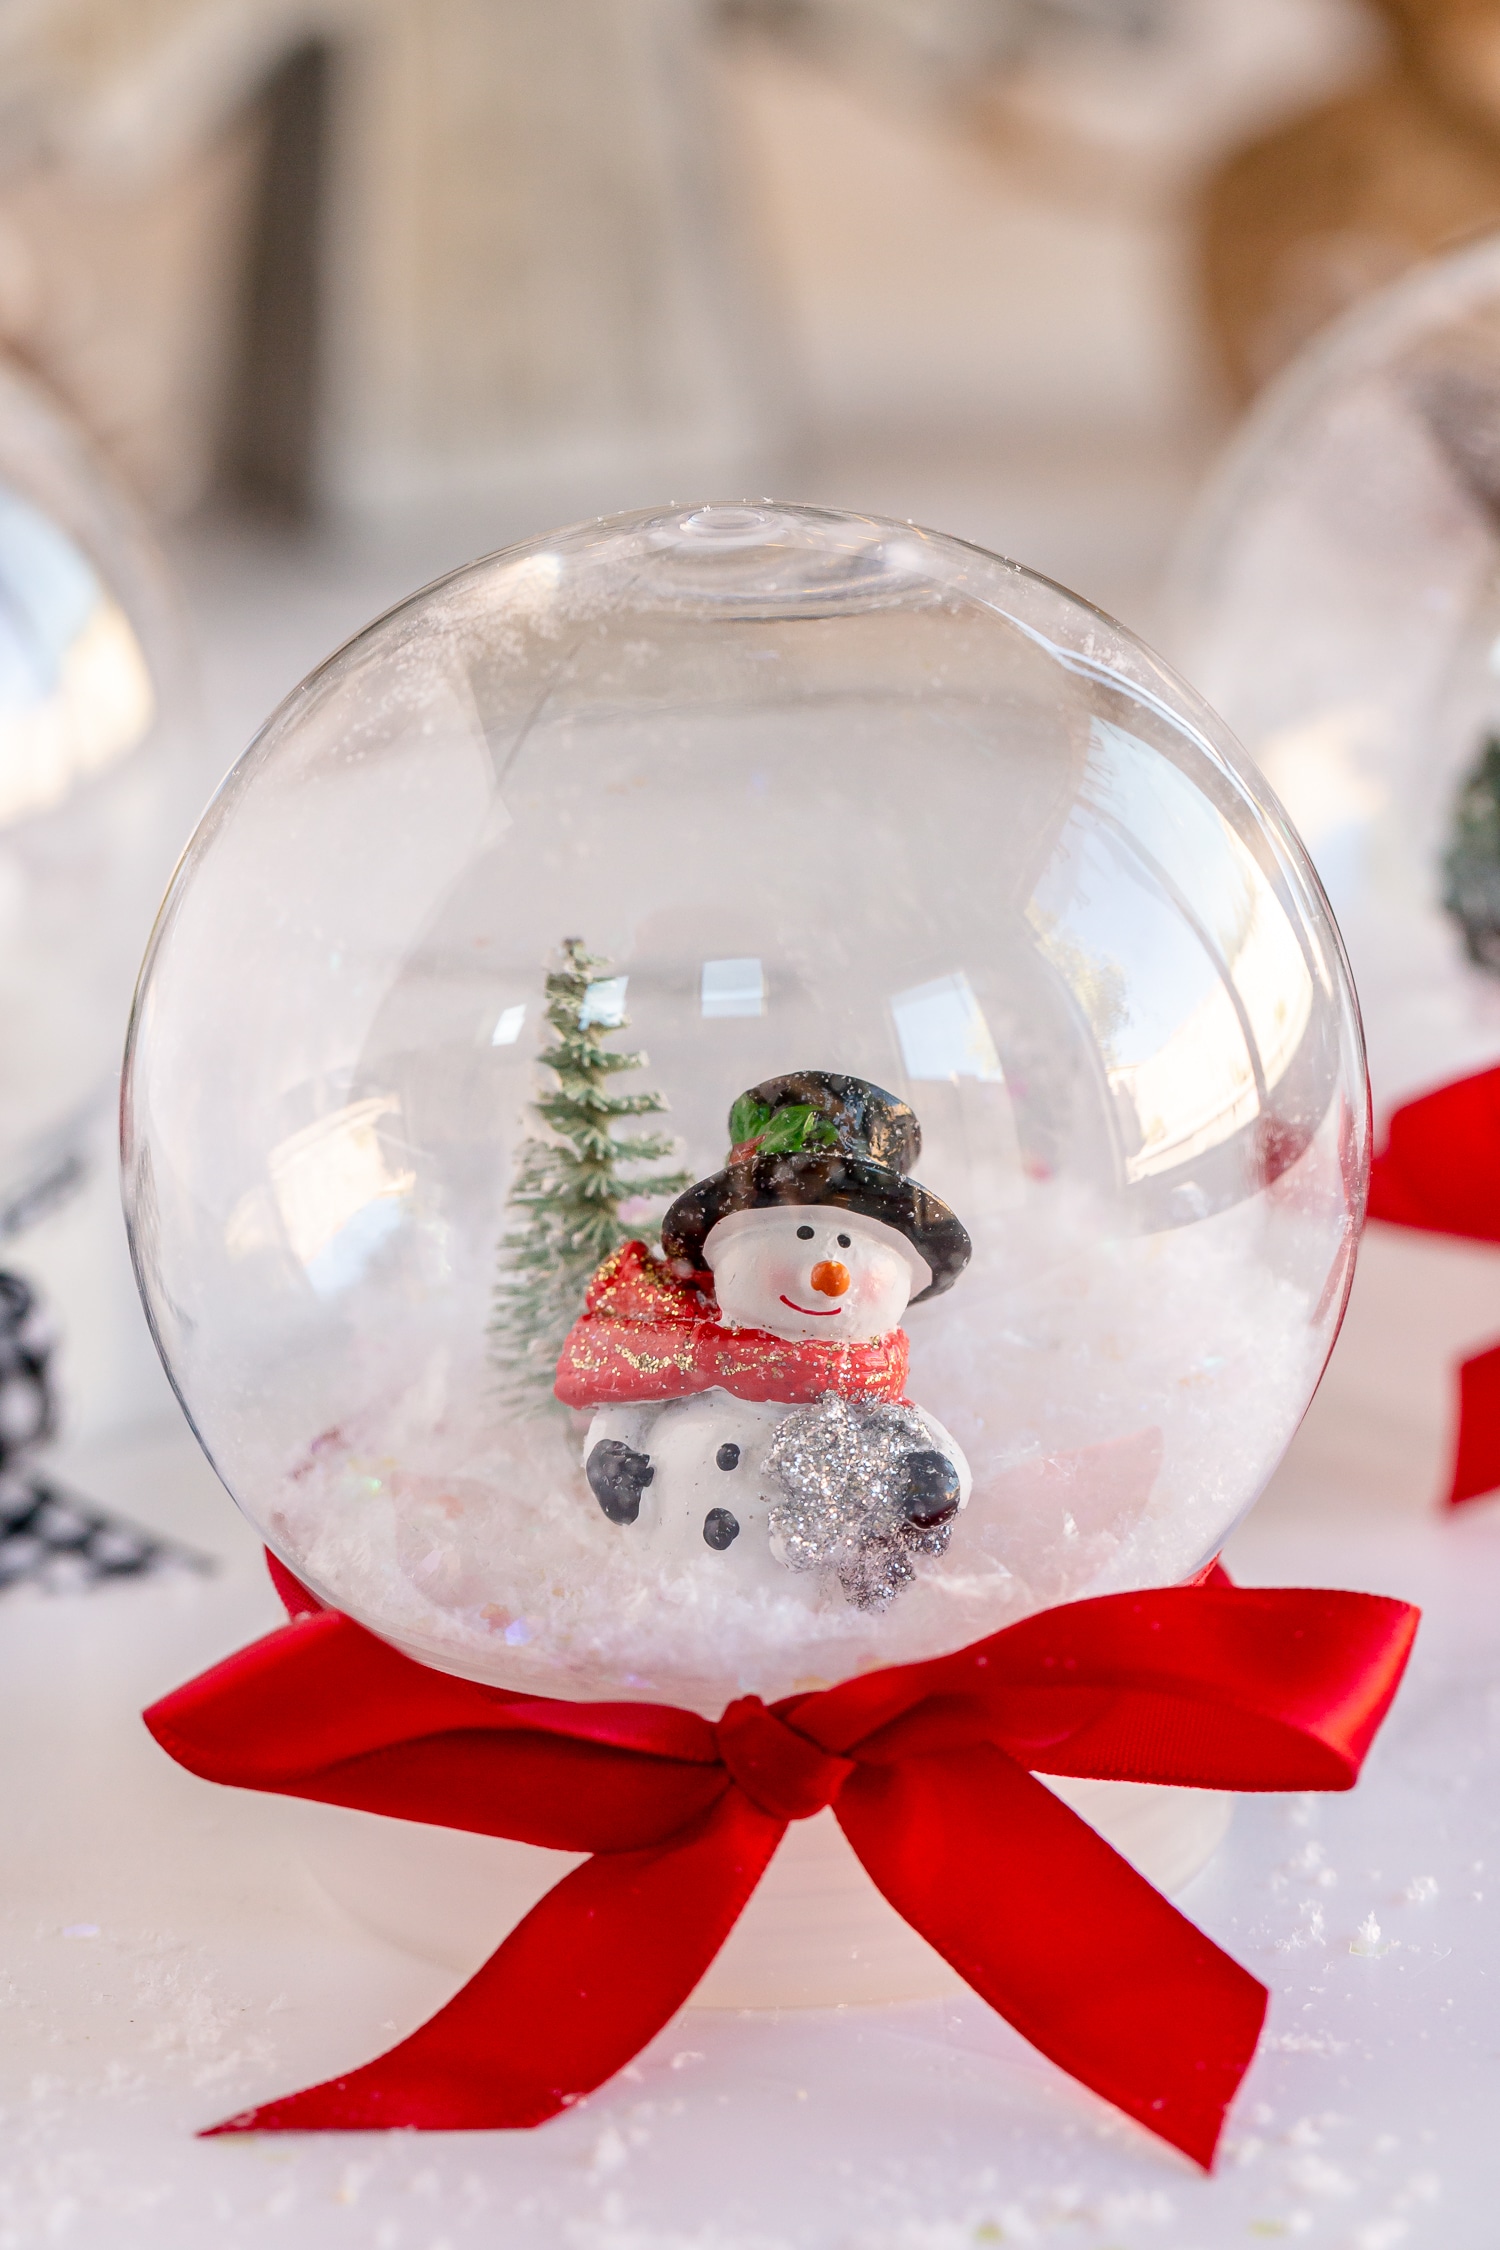 DIY Snow Globe with tree and snowman